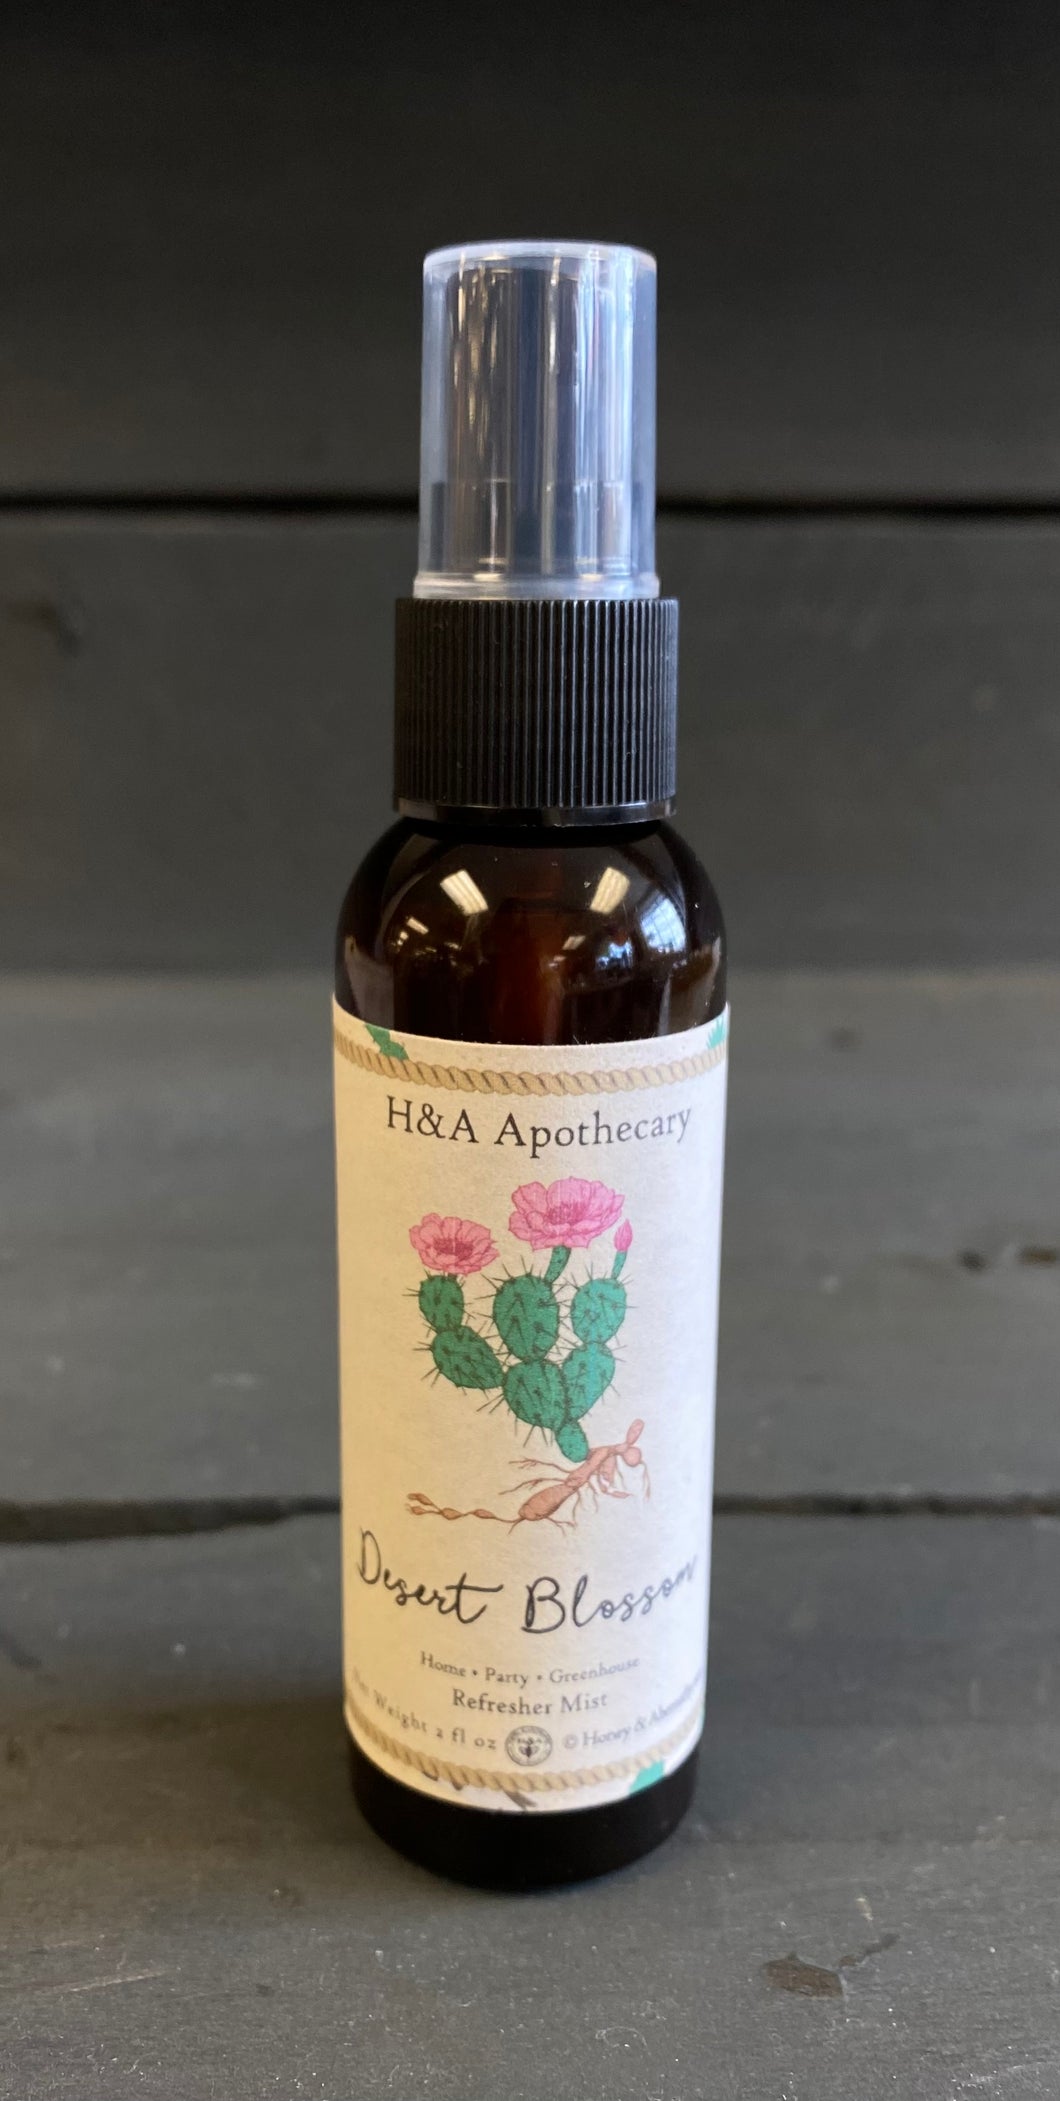 H&A Apothecary Desert Blossom Refresher Mist